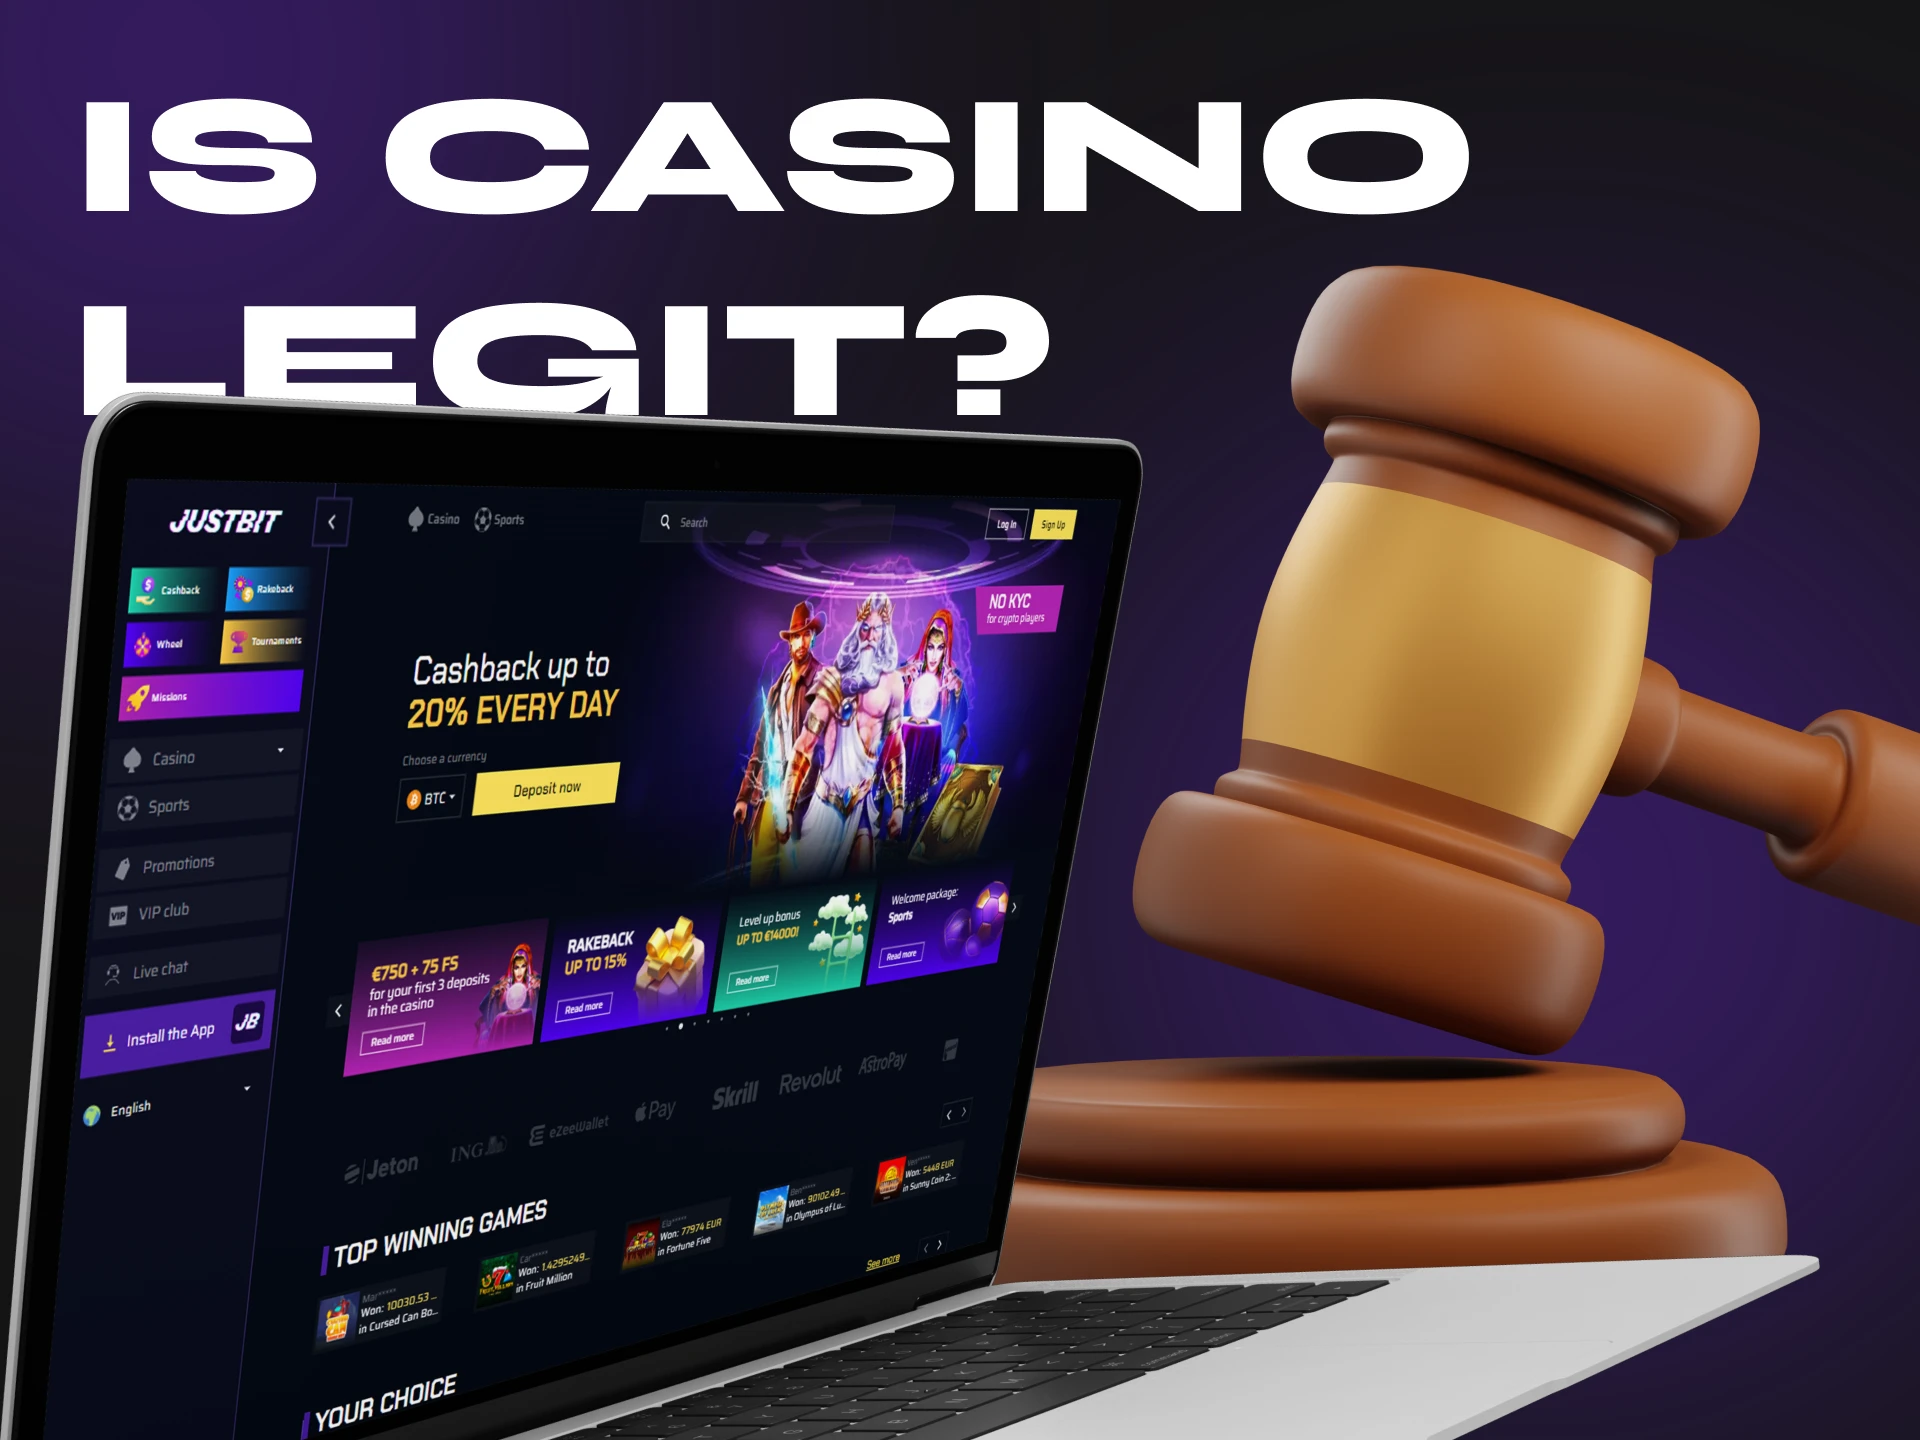 Justbit Casino provides its users with a reliable gaming environment.